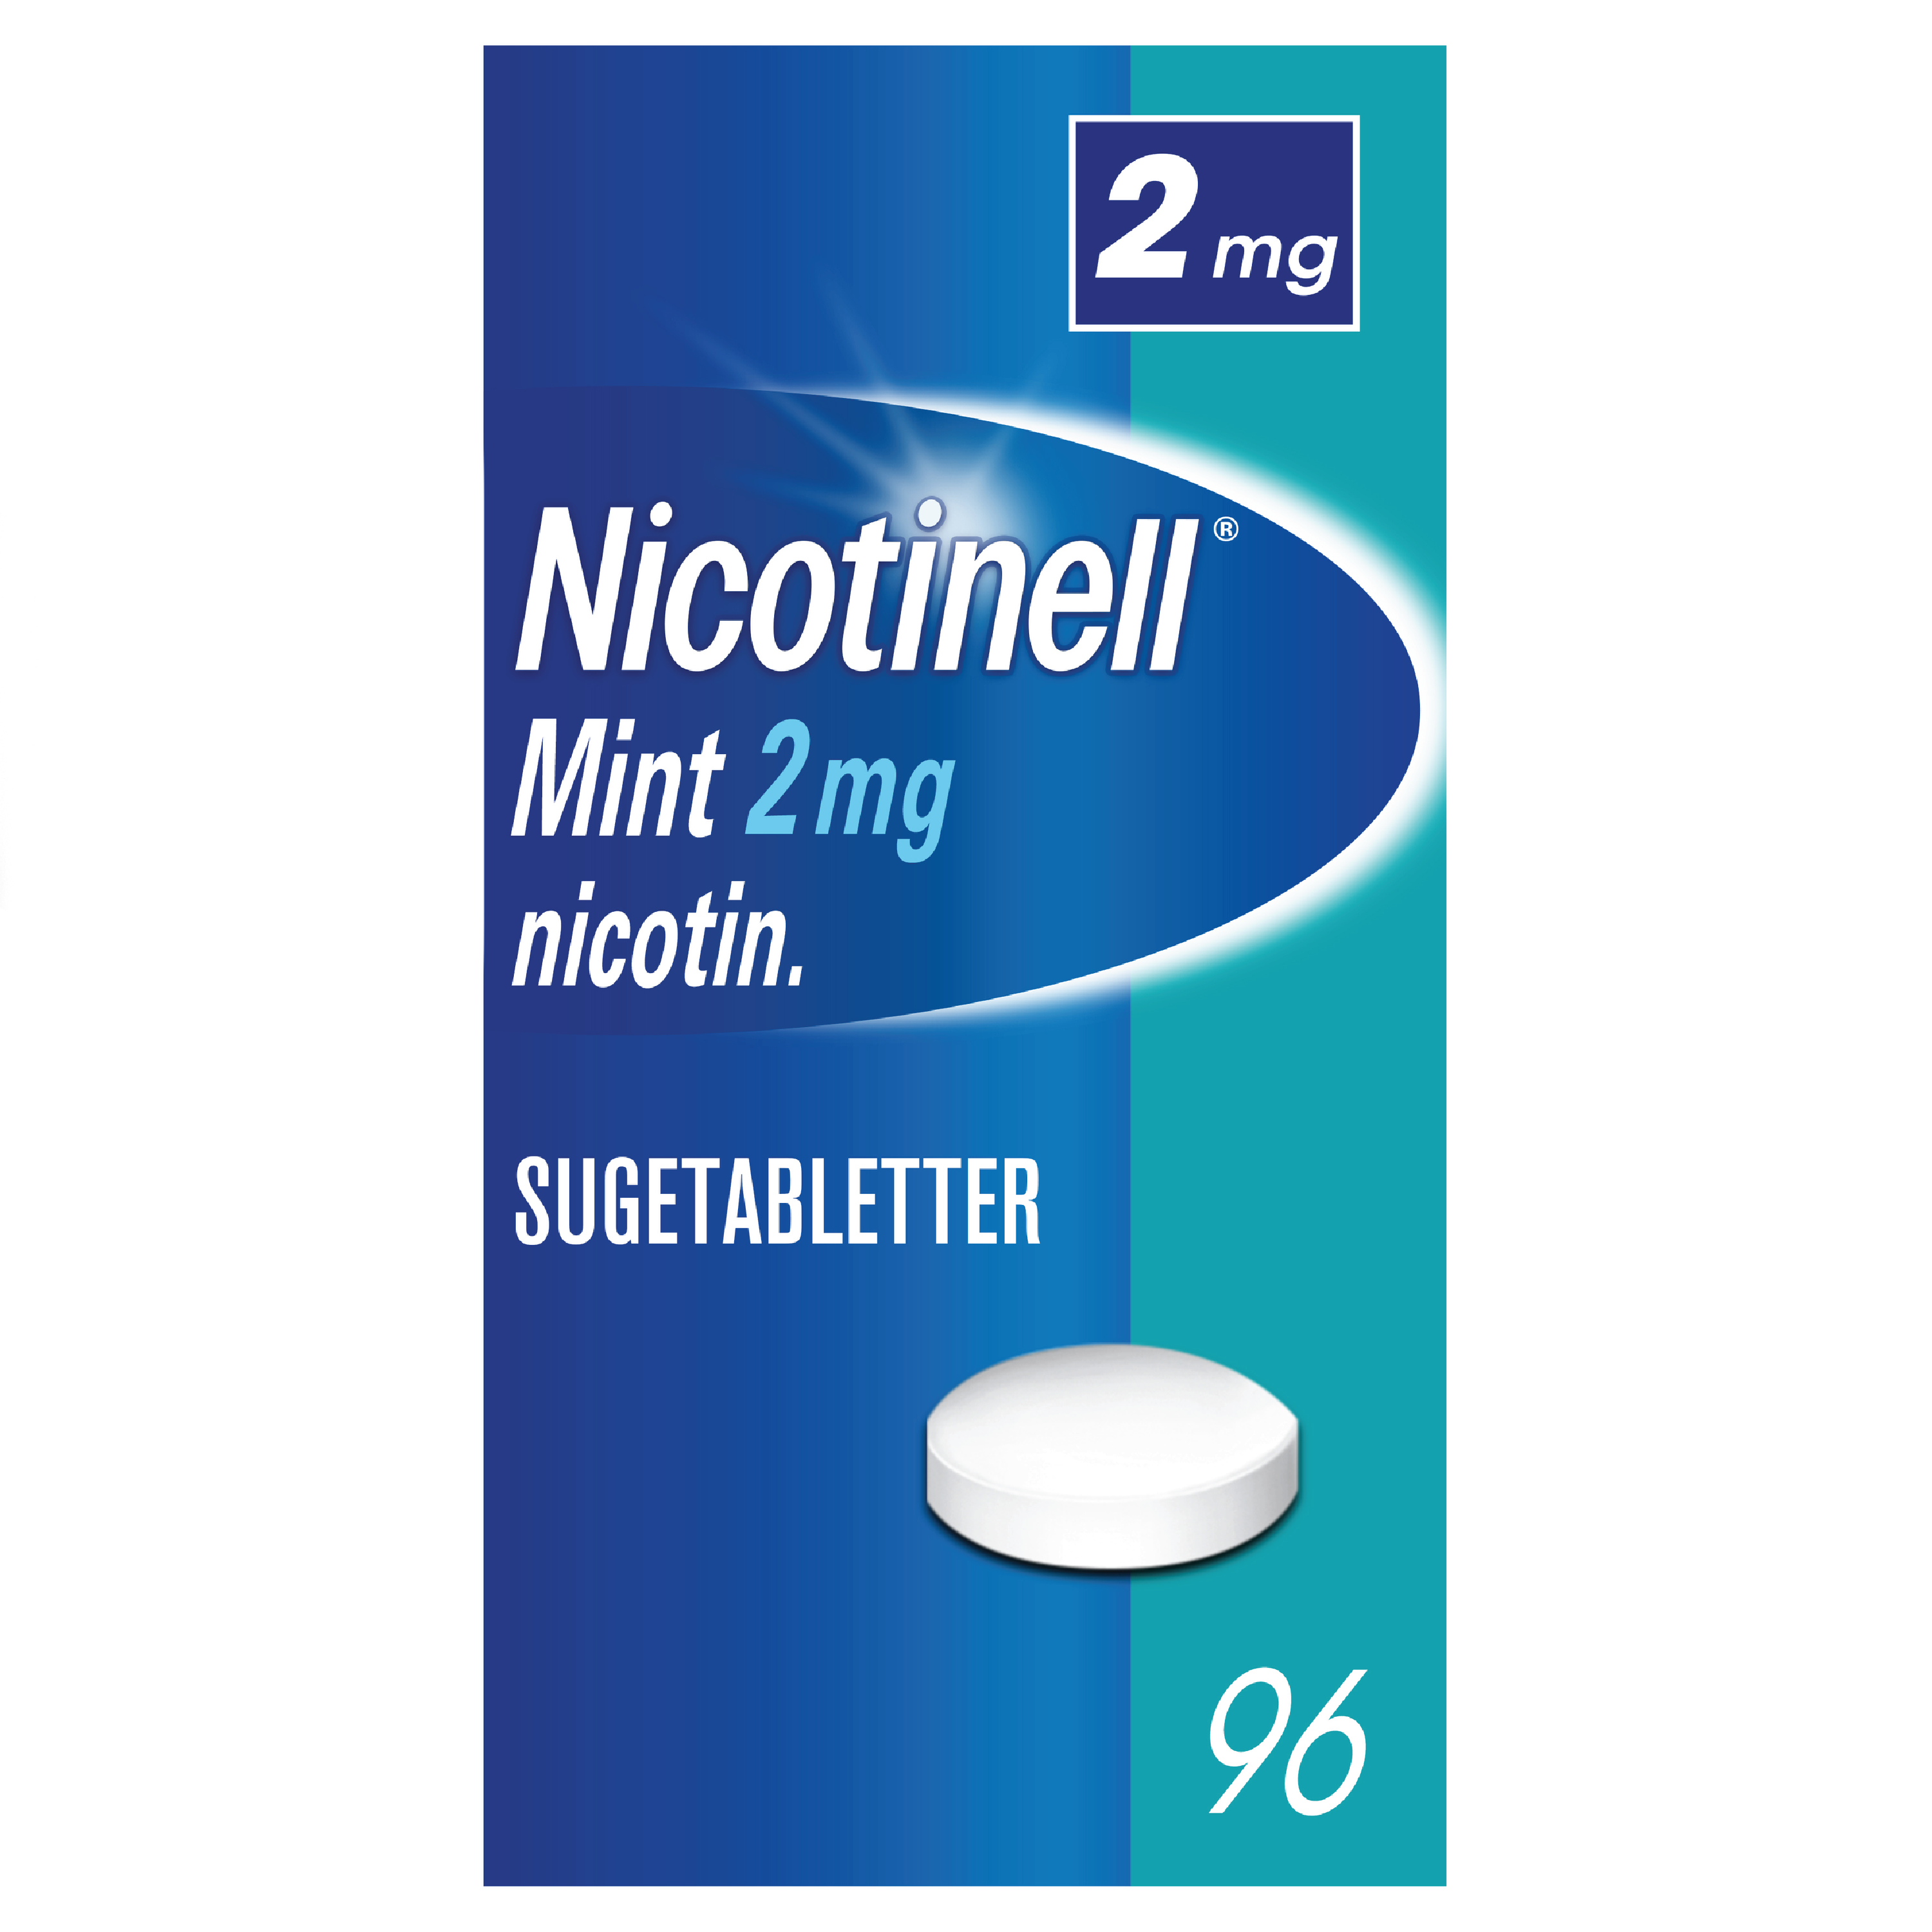 Nicotinell Sugetabletter 2mg, 96 stk.